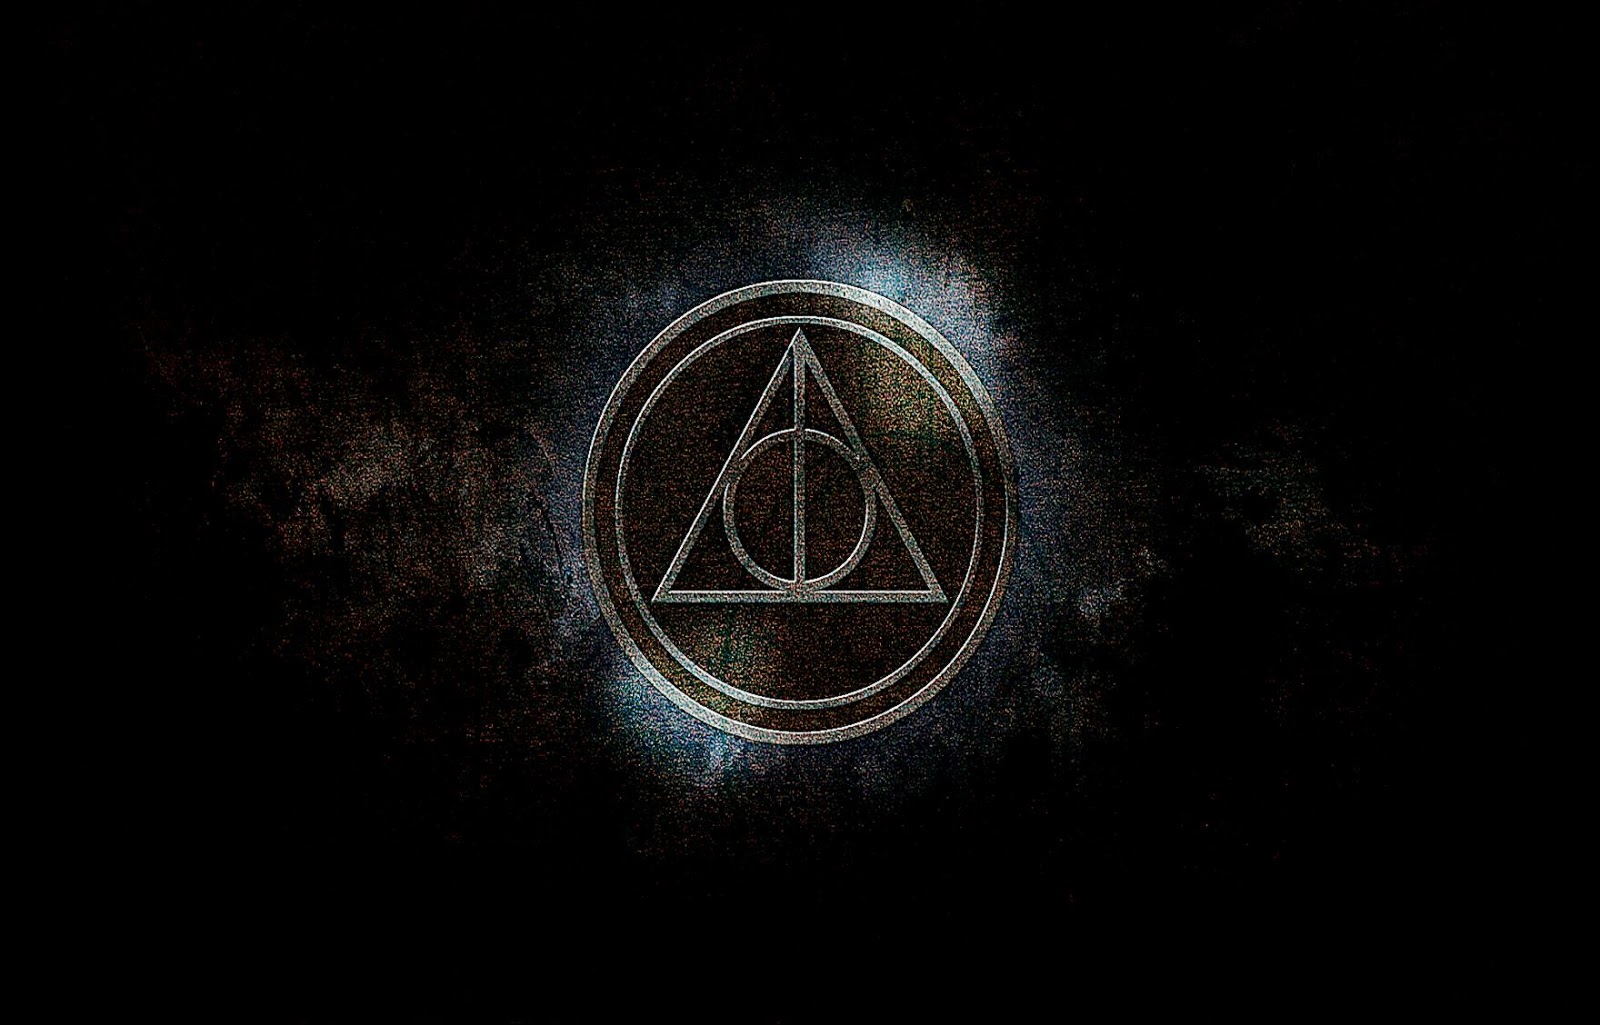 Deathly hallows wallpaper, Harry potter wallpaper background, Harry potter wallpaper